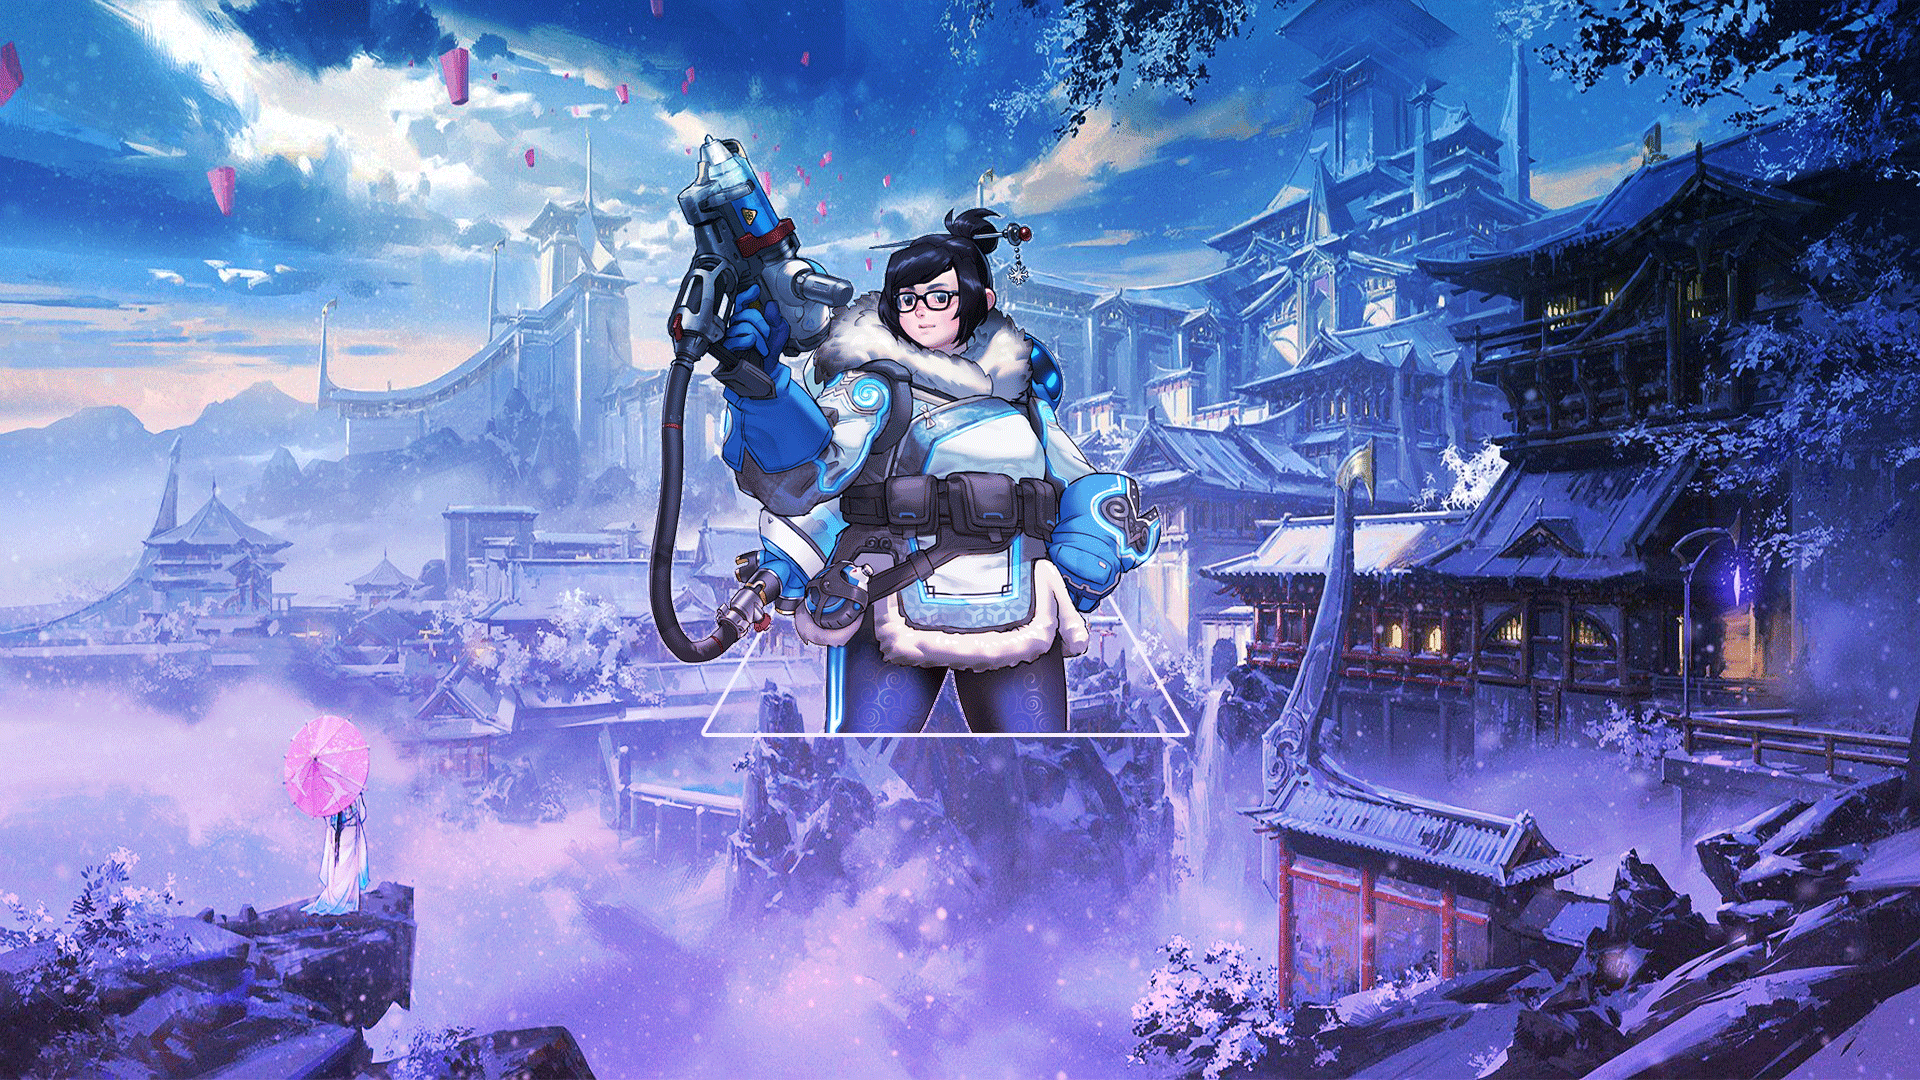 Mei Overwatch Overwatch Anime Video Game Art PC Gaming PlayStation 4 Picture In Picture 1920x1080